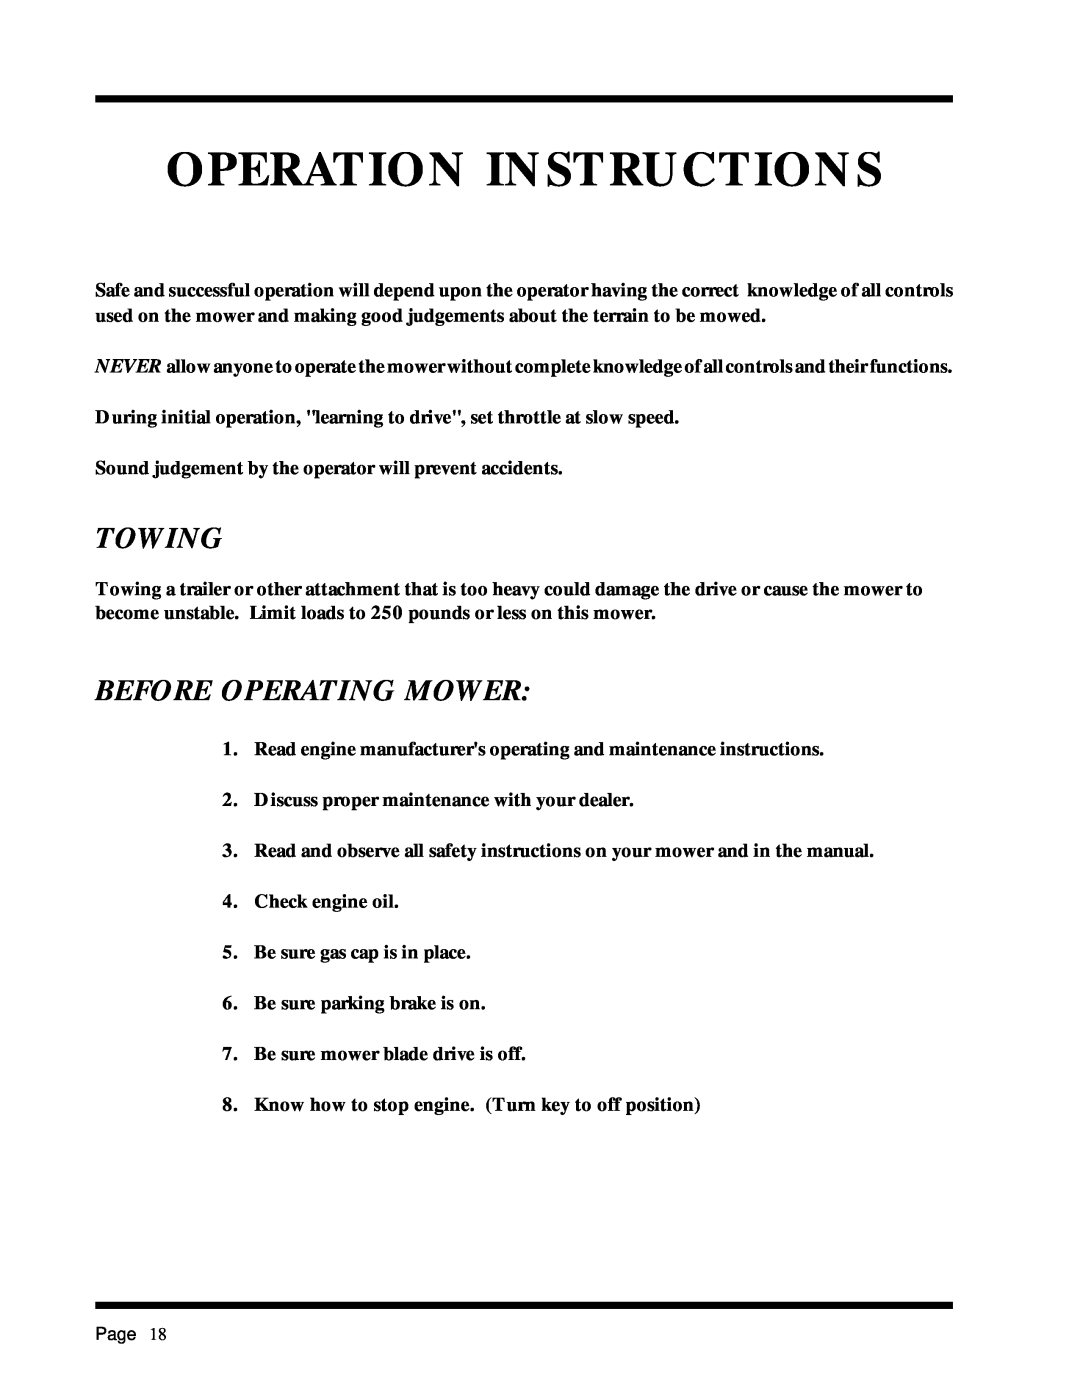 Dixon 6025 manual Operation Instructions, Towing, Before Operating Mower 